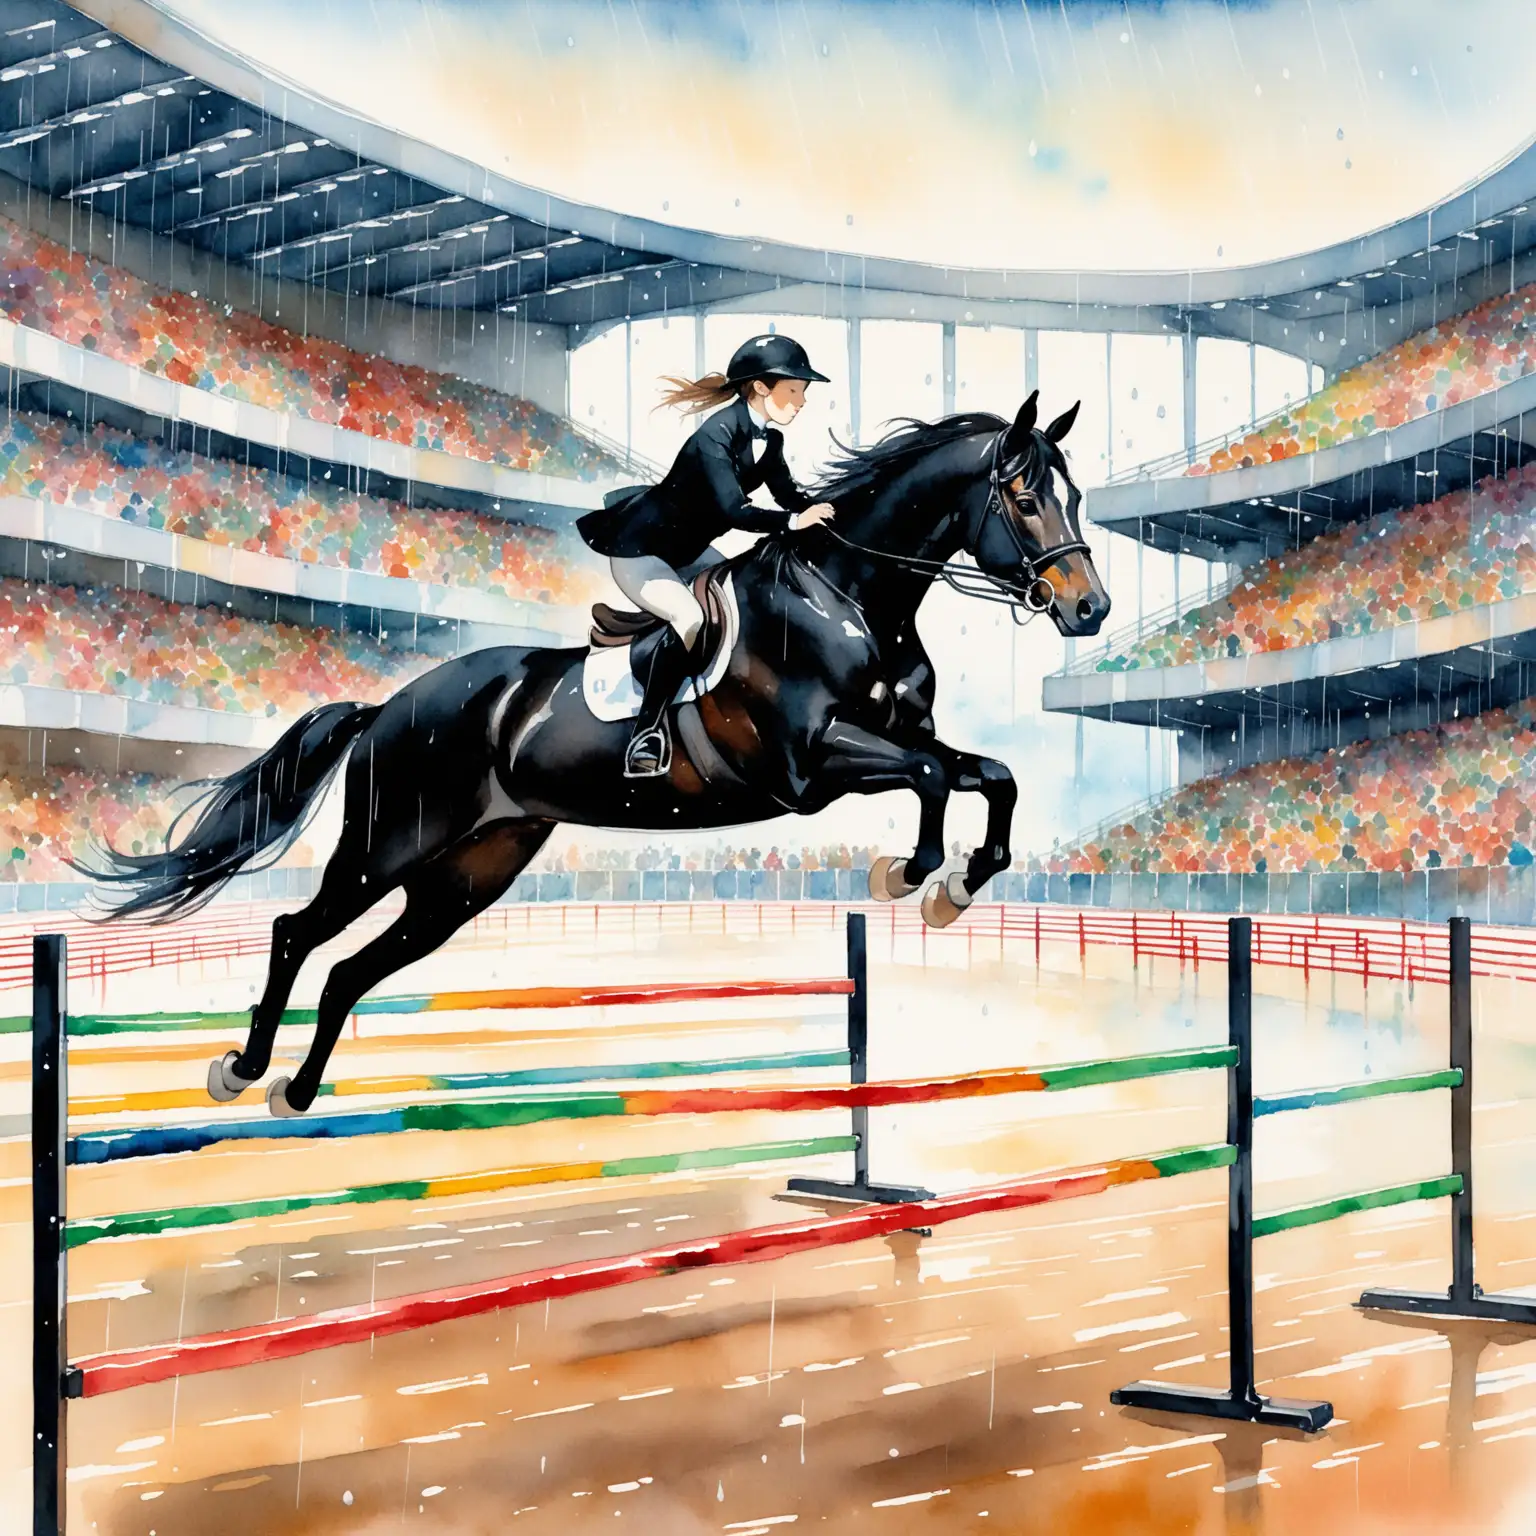 a beautiful black horse, in a beautiful arena, jumping over colorful hurdles, big audience, large windows, it’s raining outside, watercolors , modern painting, Edgar Degas style